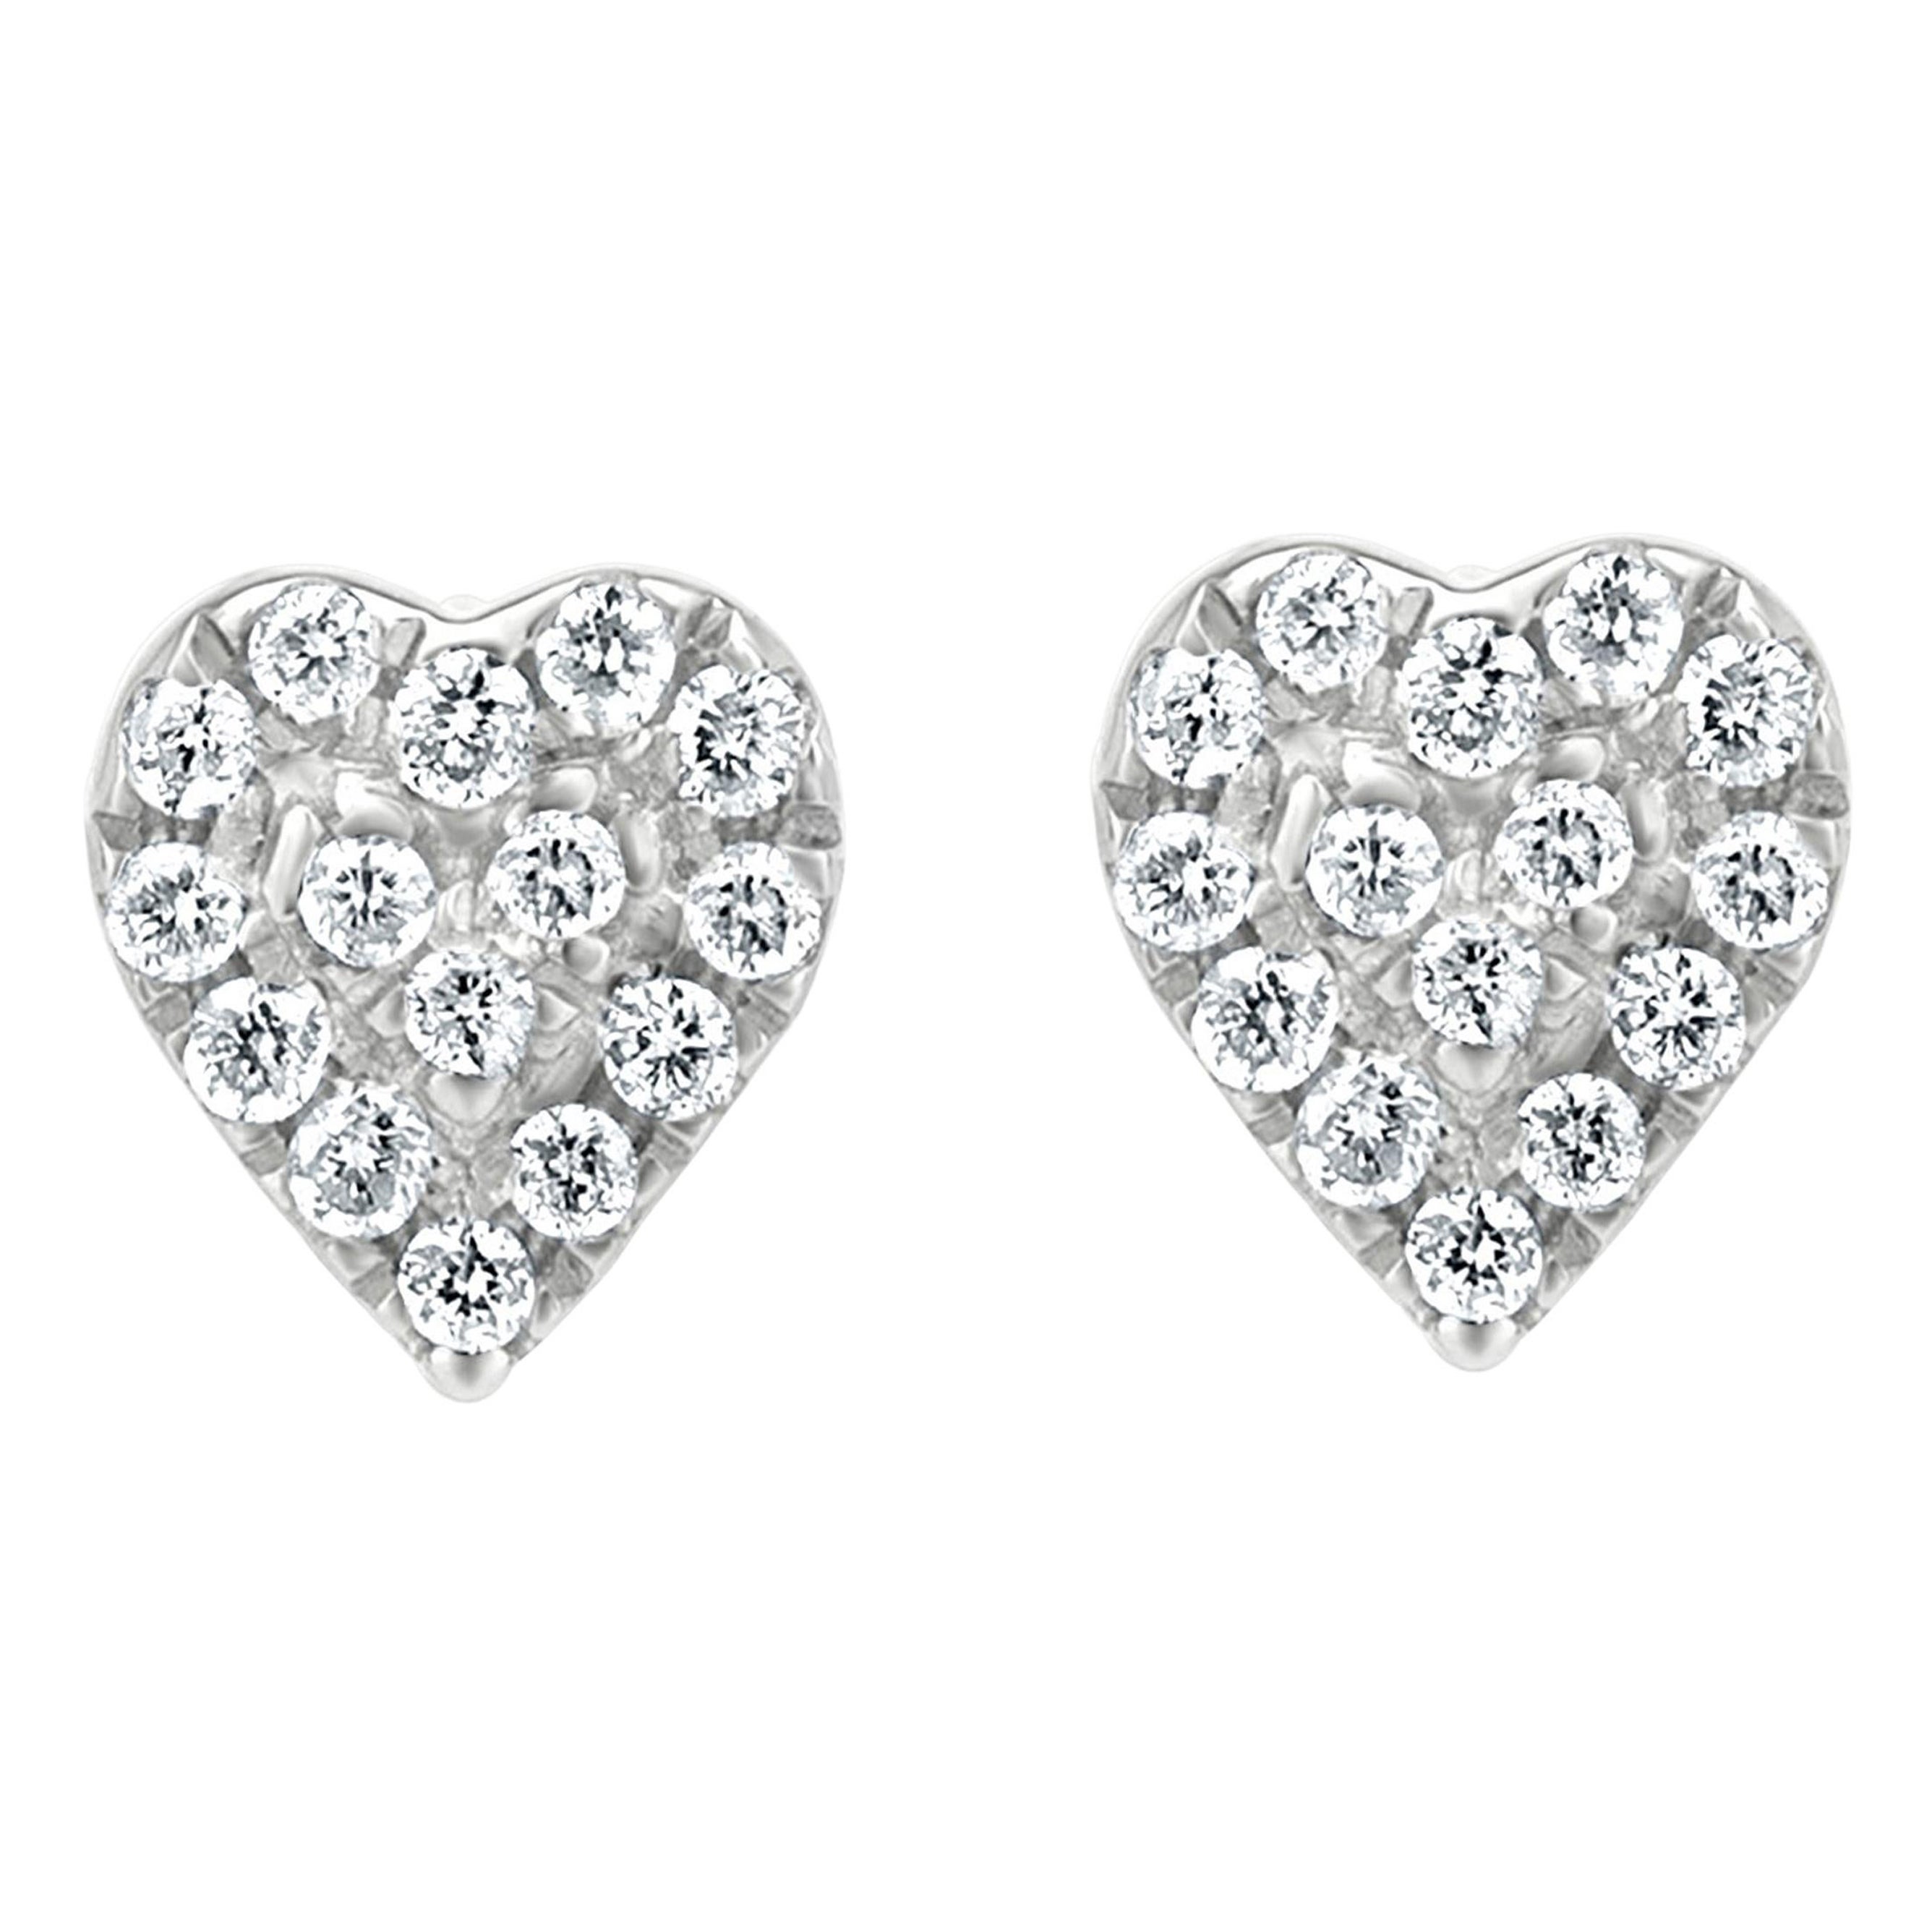 Cartier Puffed Heart Diamond Stud Earrings in White Gold at 1stDibs